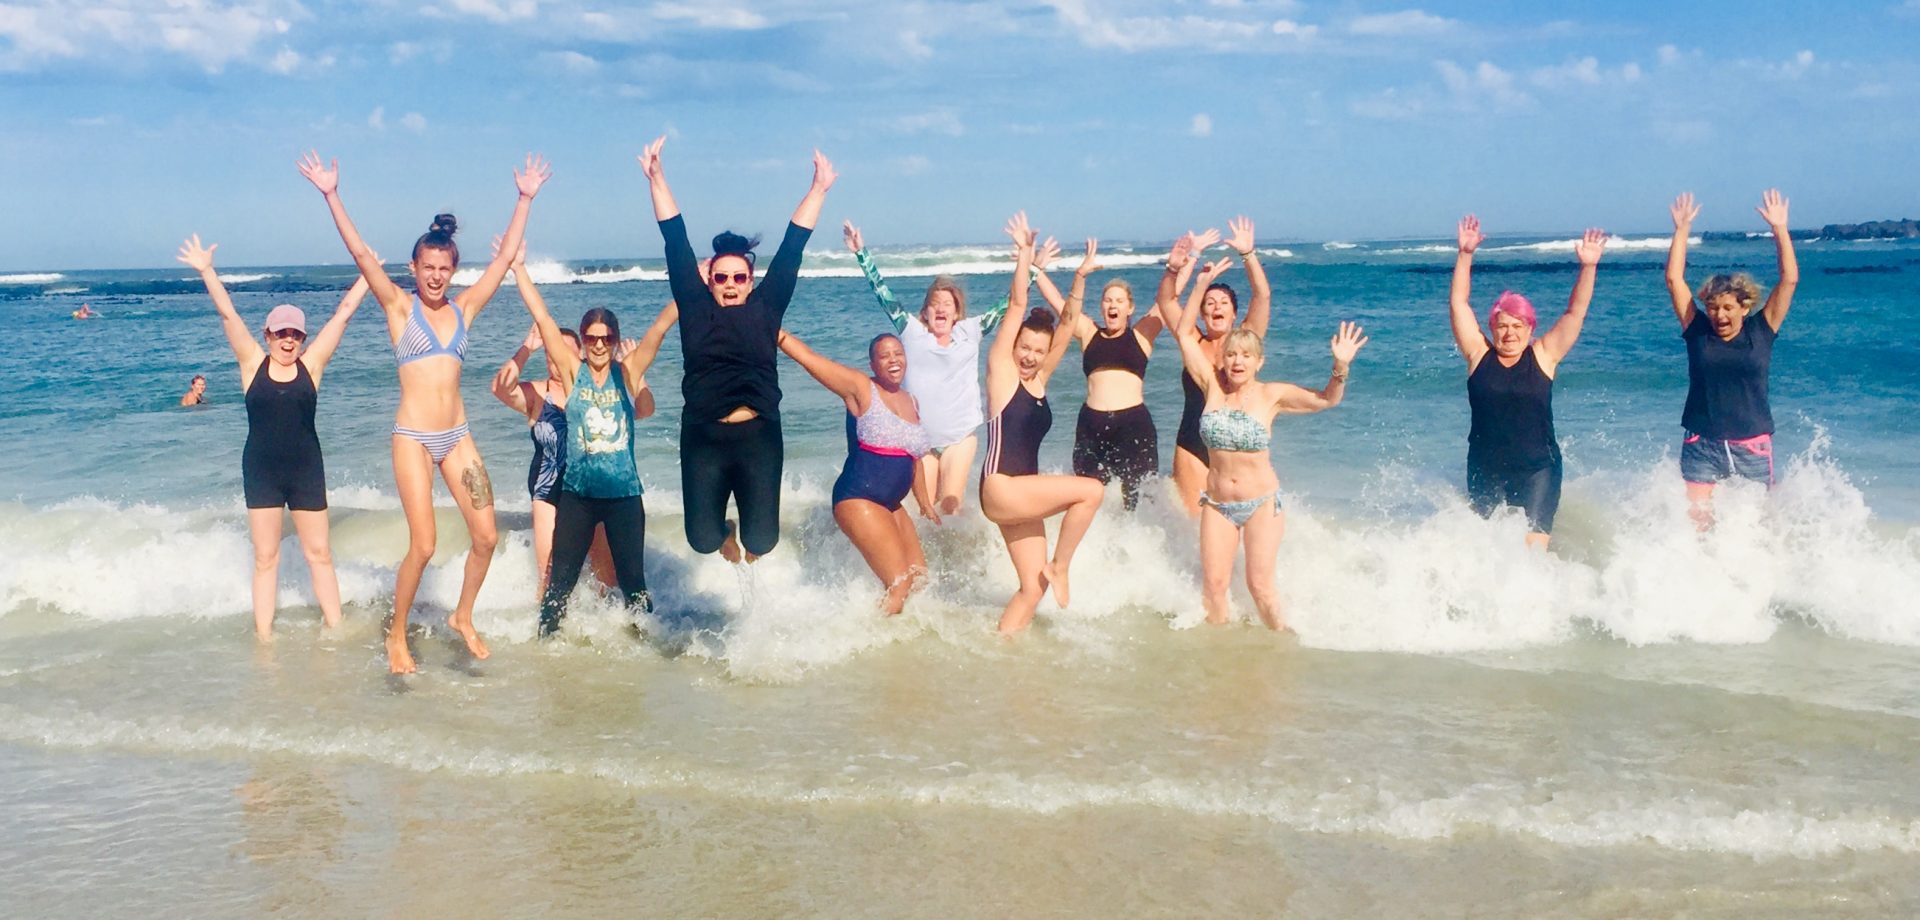 Celebrating 100th Free Beach Yoga and Cold Water Swim Event: A Cape Town Miracle